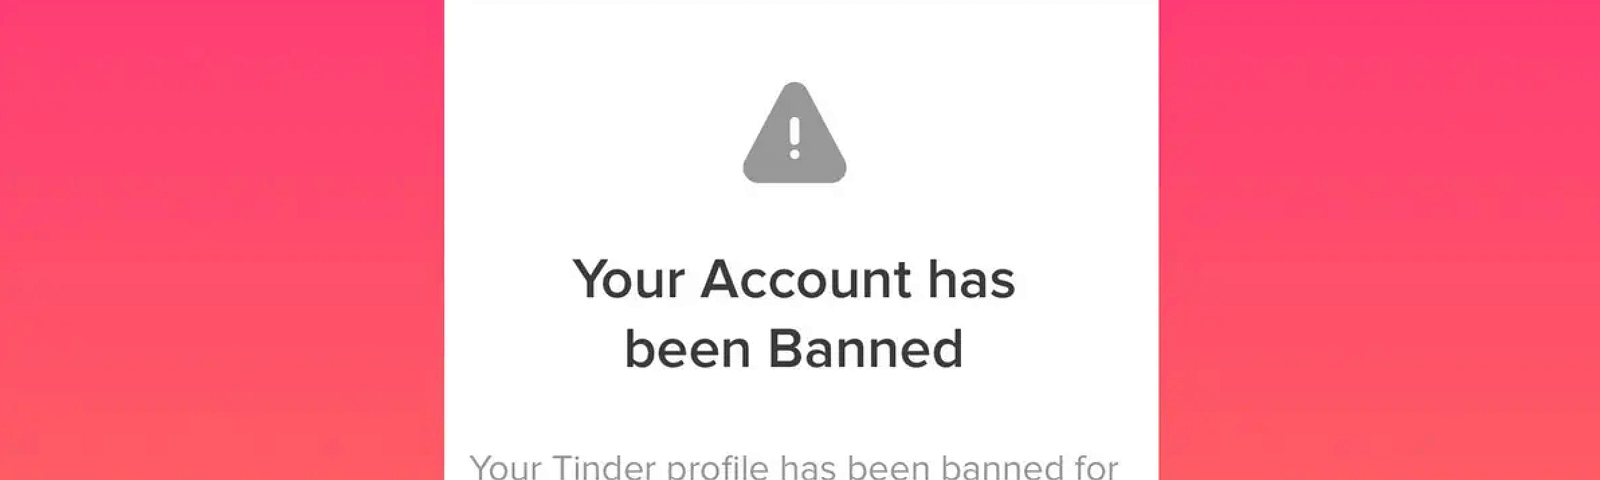 A banning notice from Tinder.